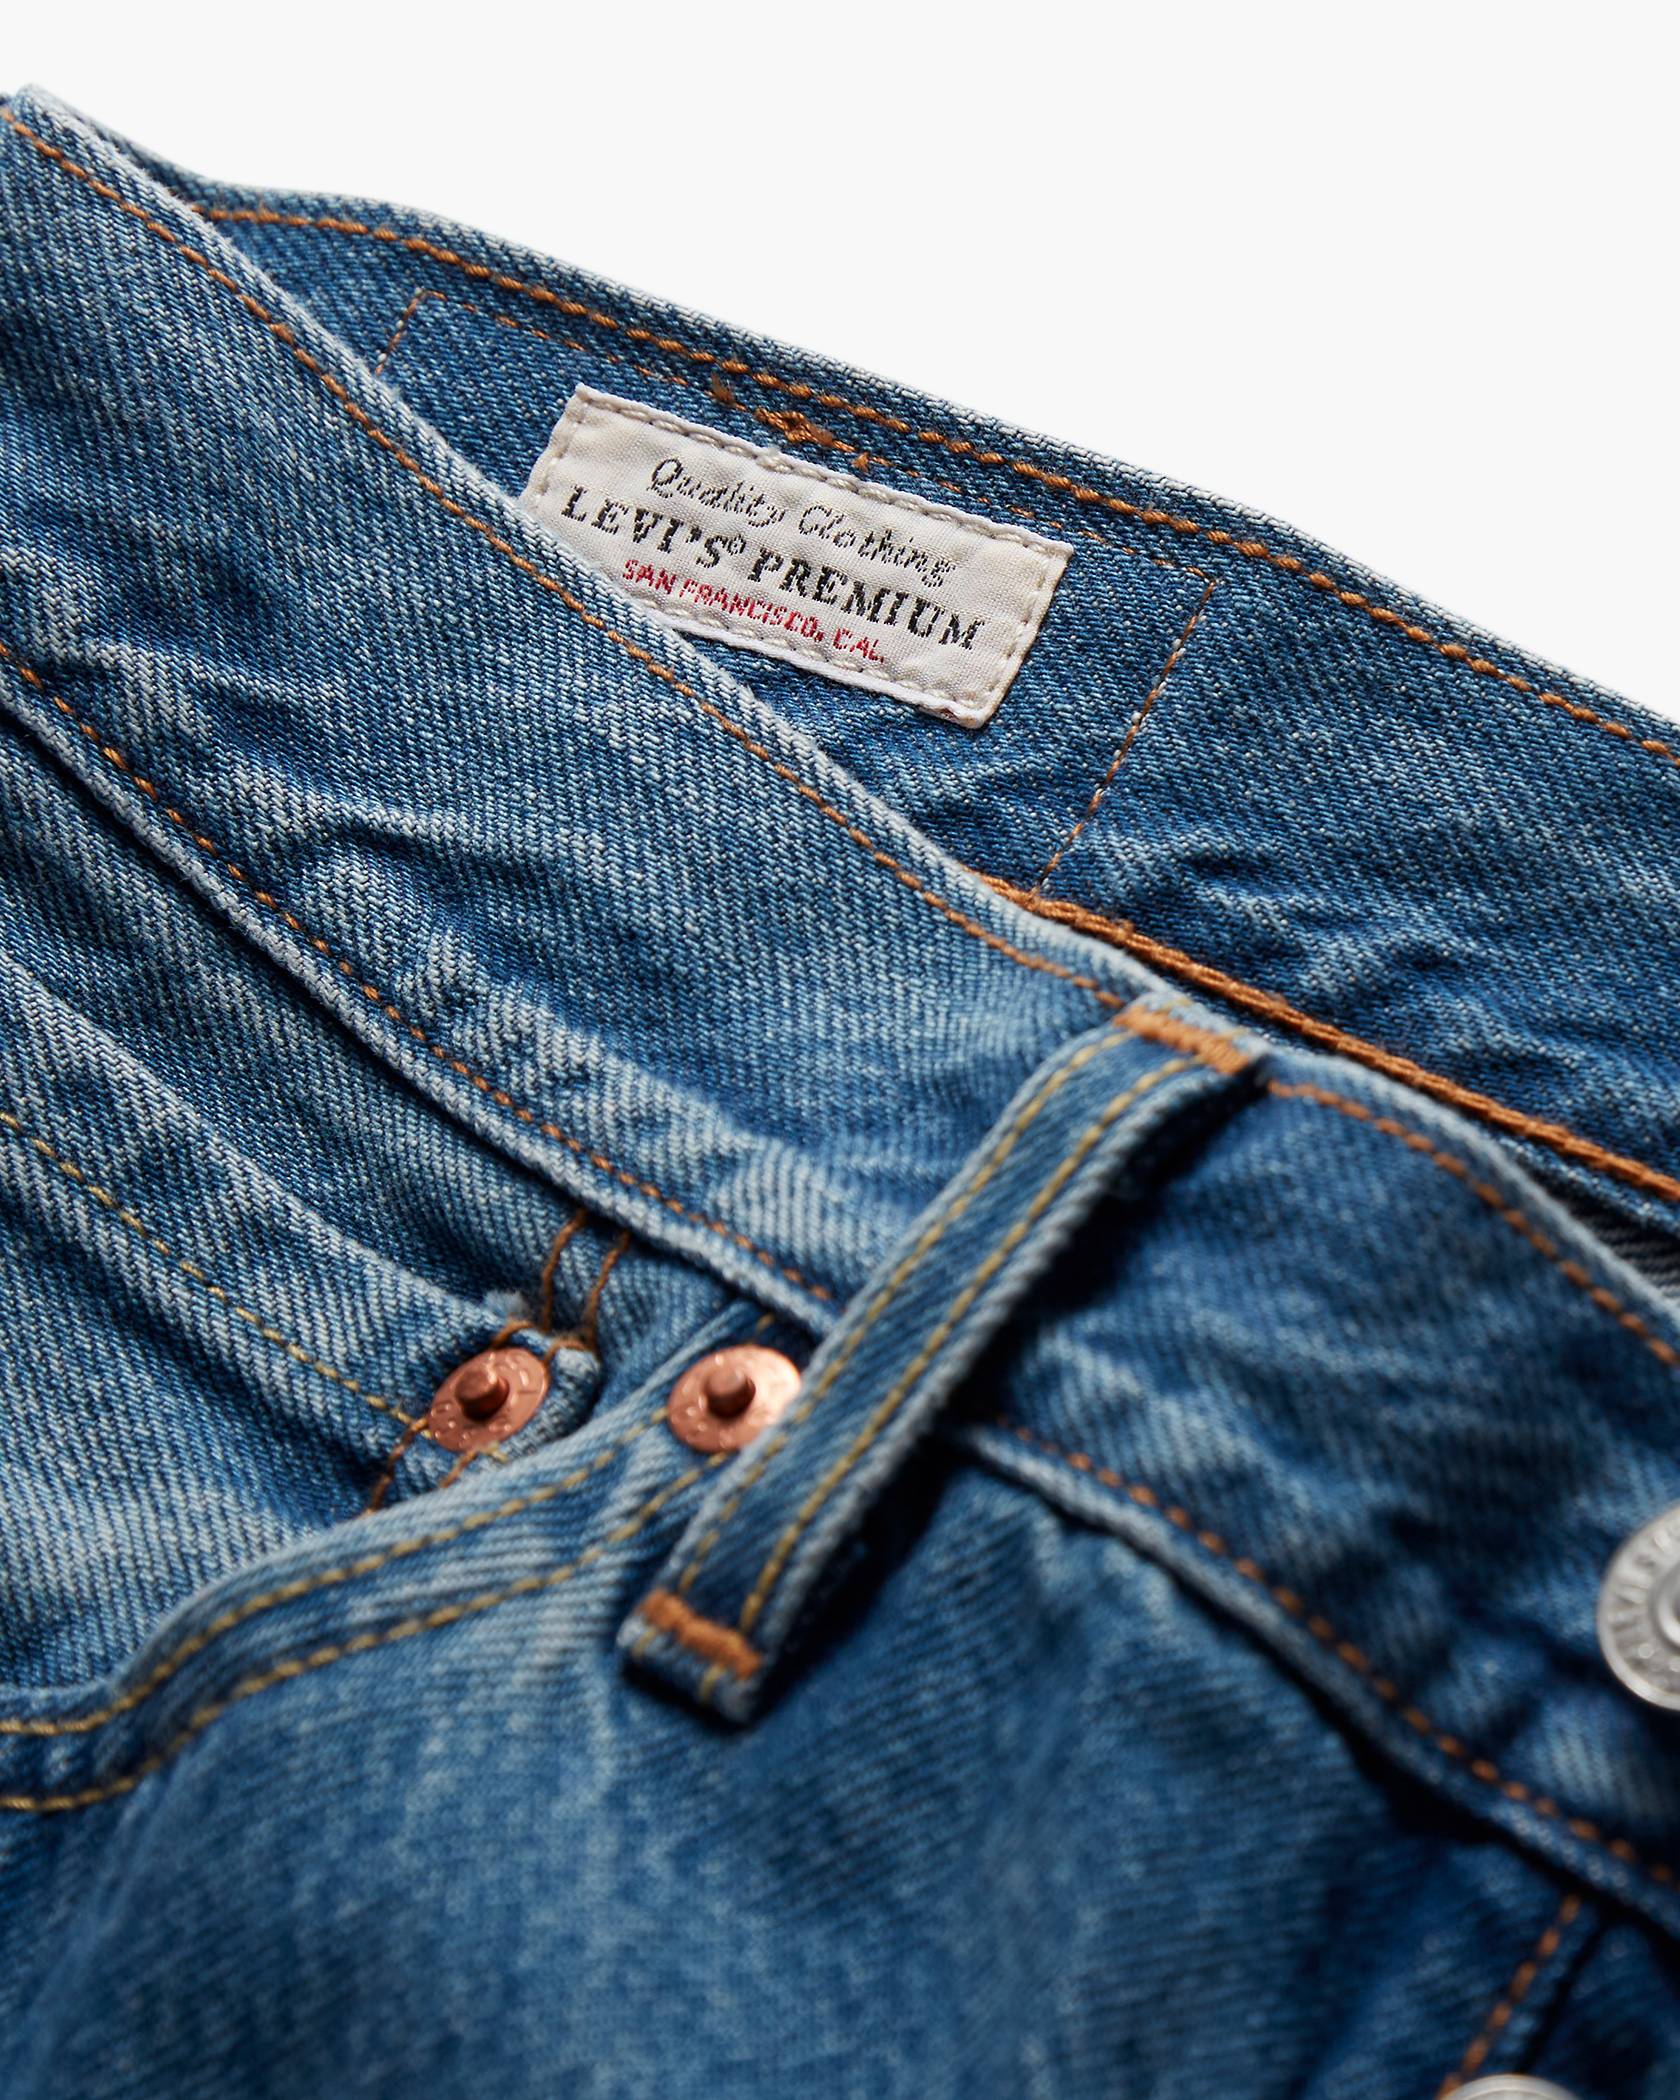 Closeup image of jeans showing the Levi's Premium Collection label.